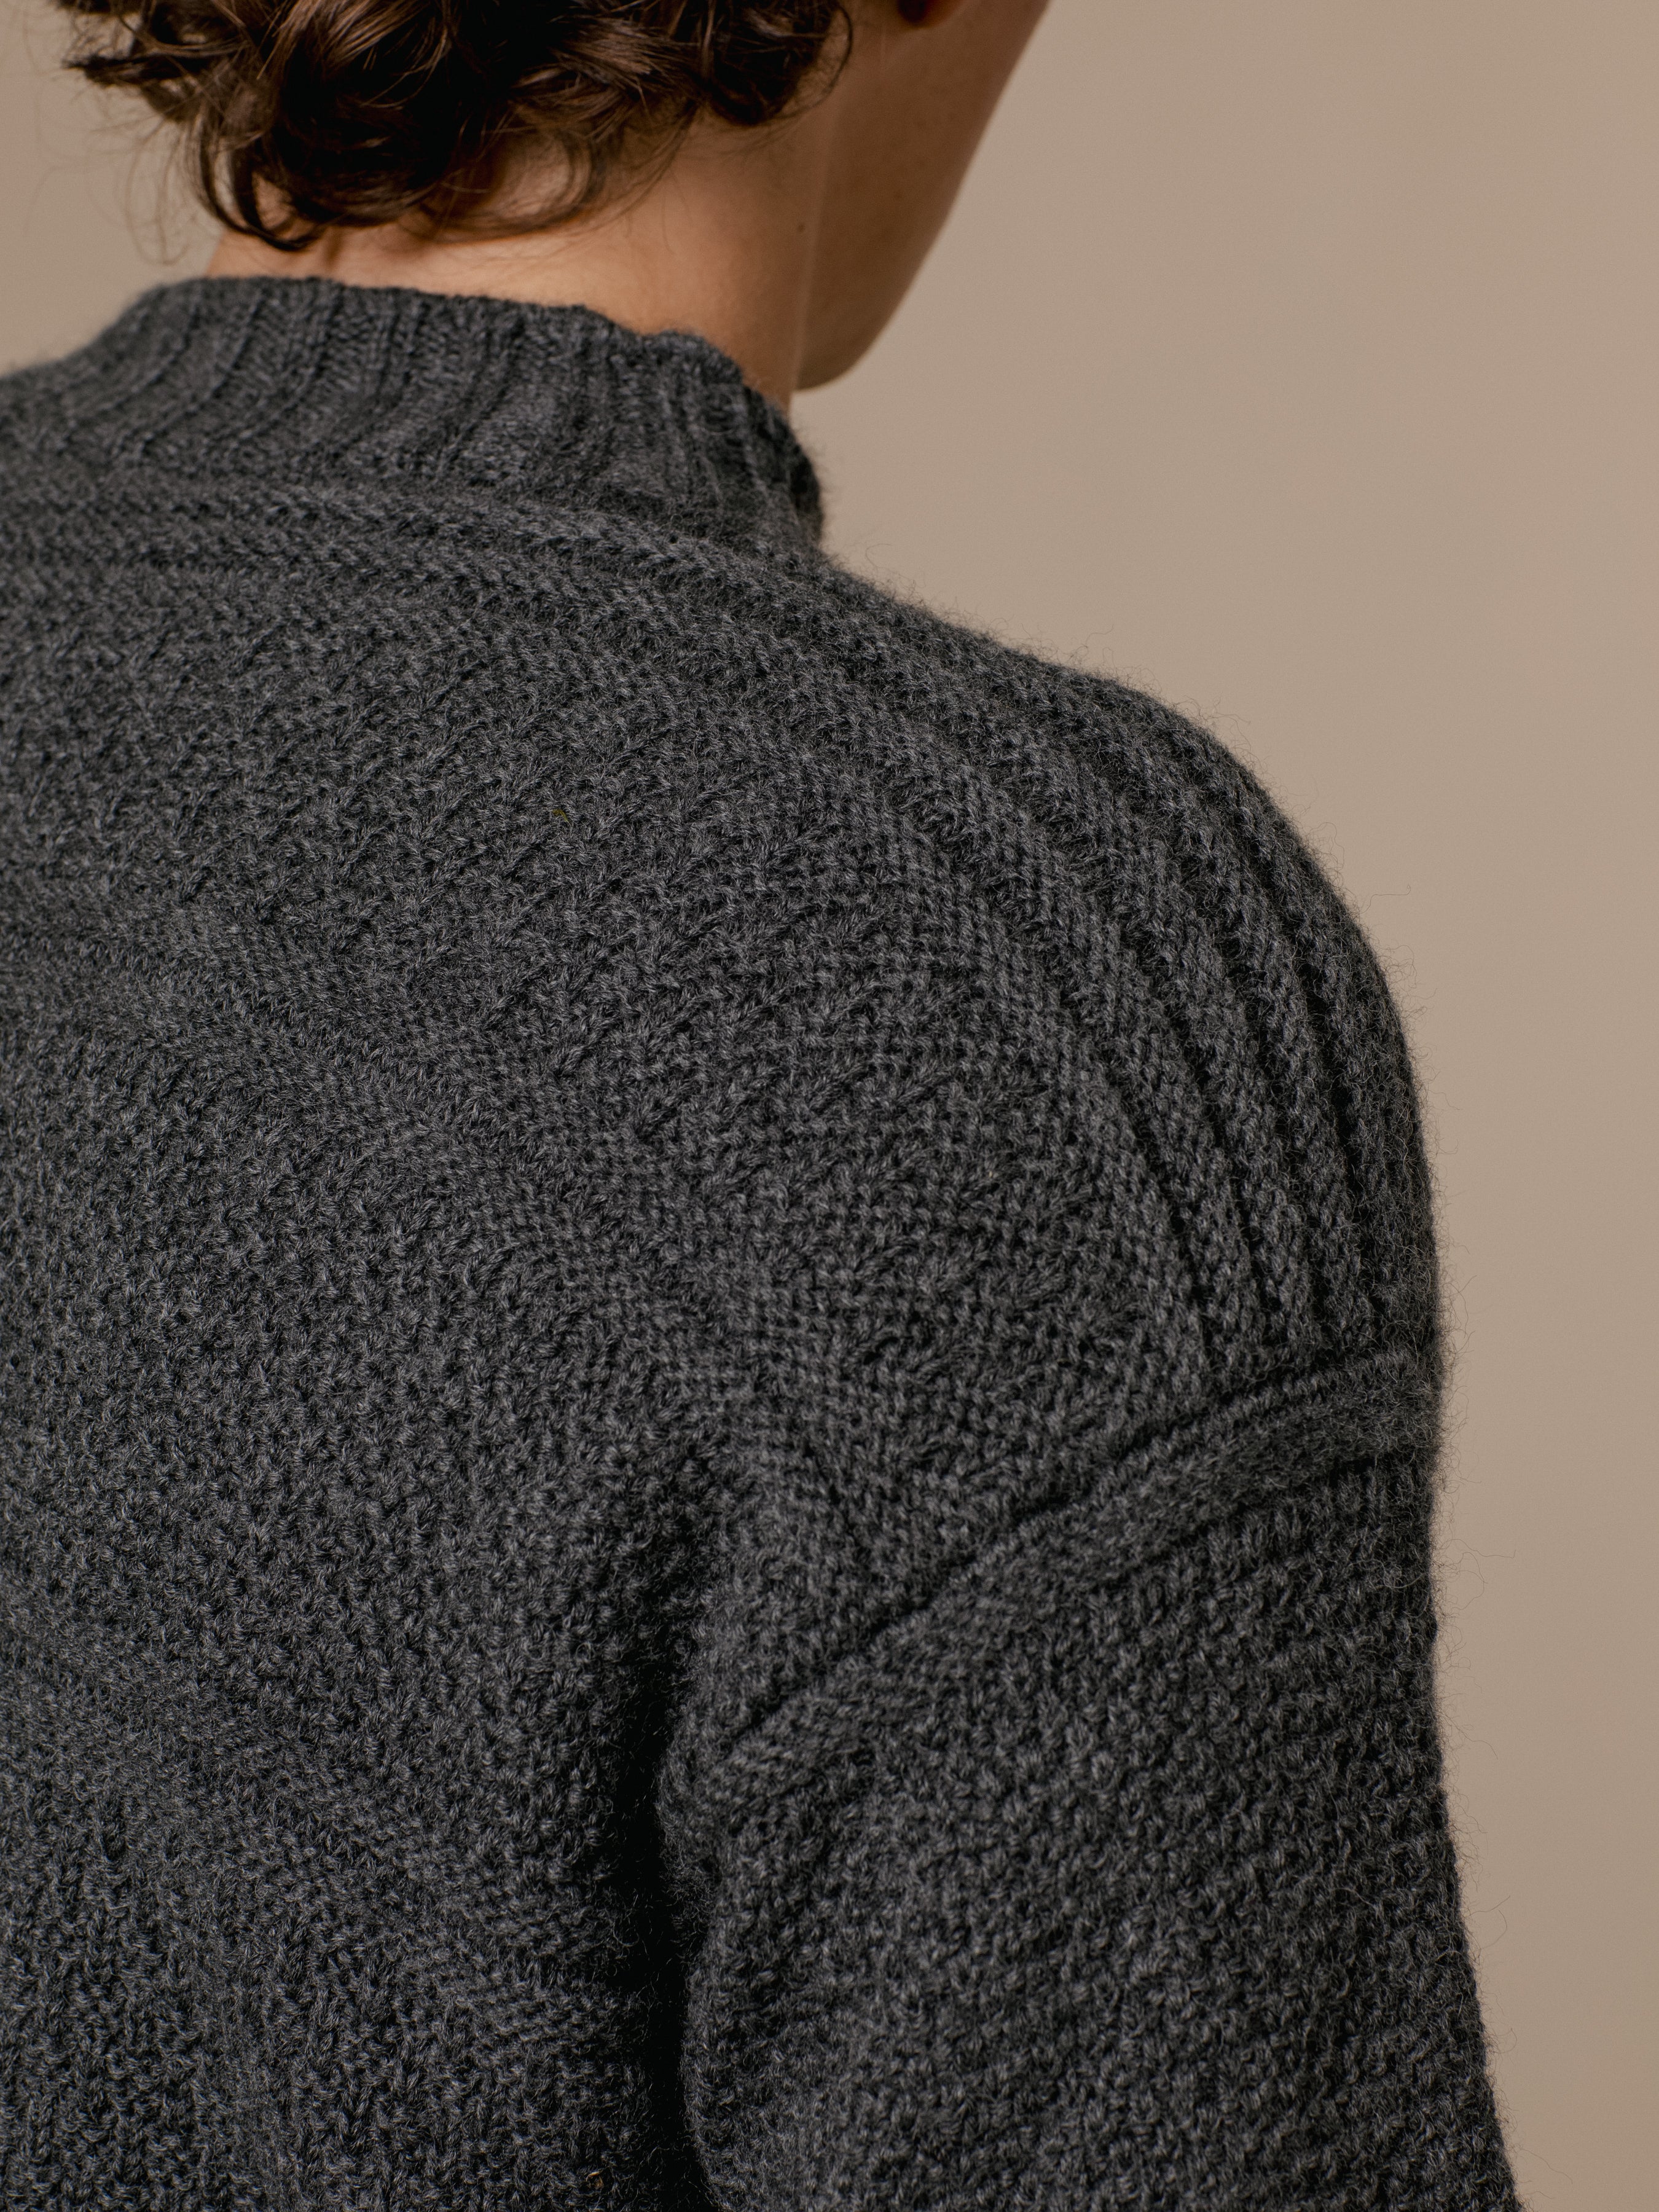 The saddle shoulder of the KESTIN Fife Gansey sweater in charcoal grey.